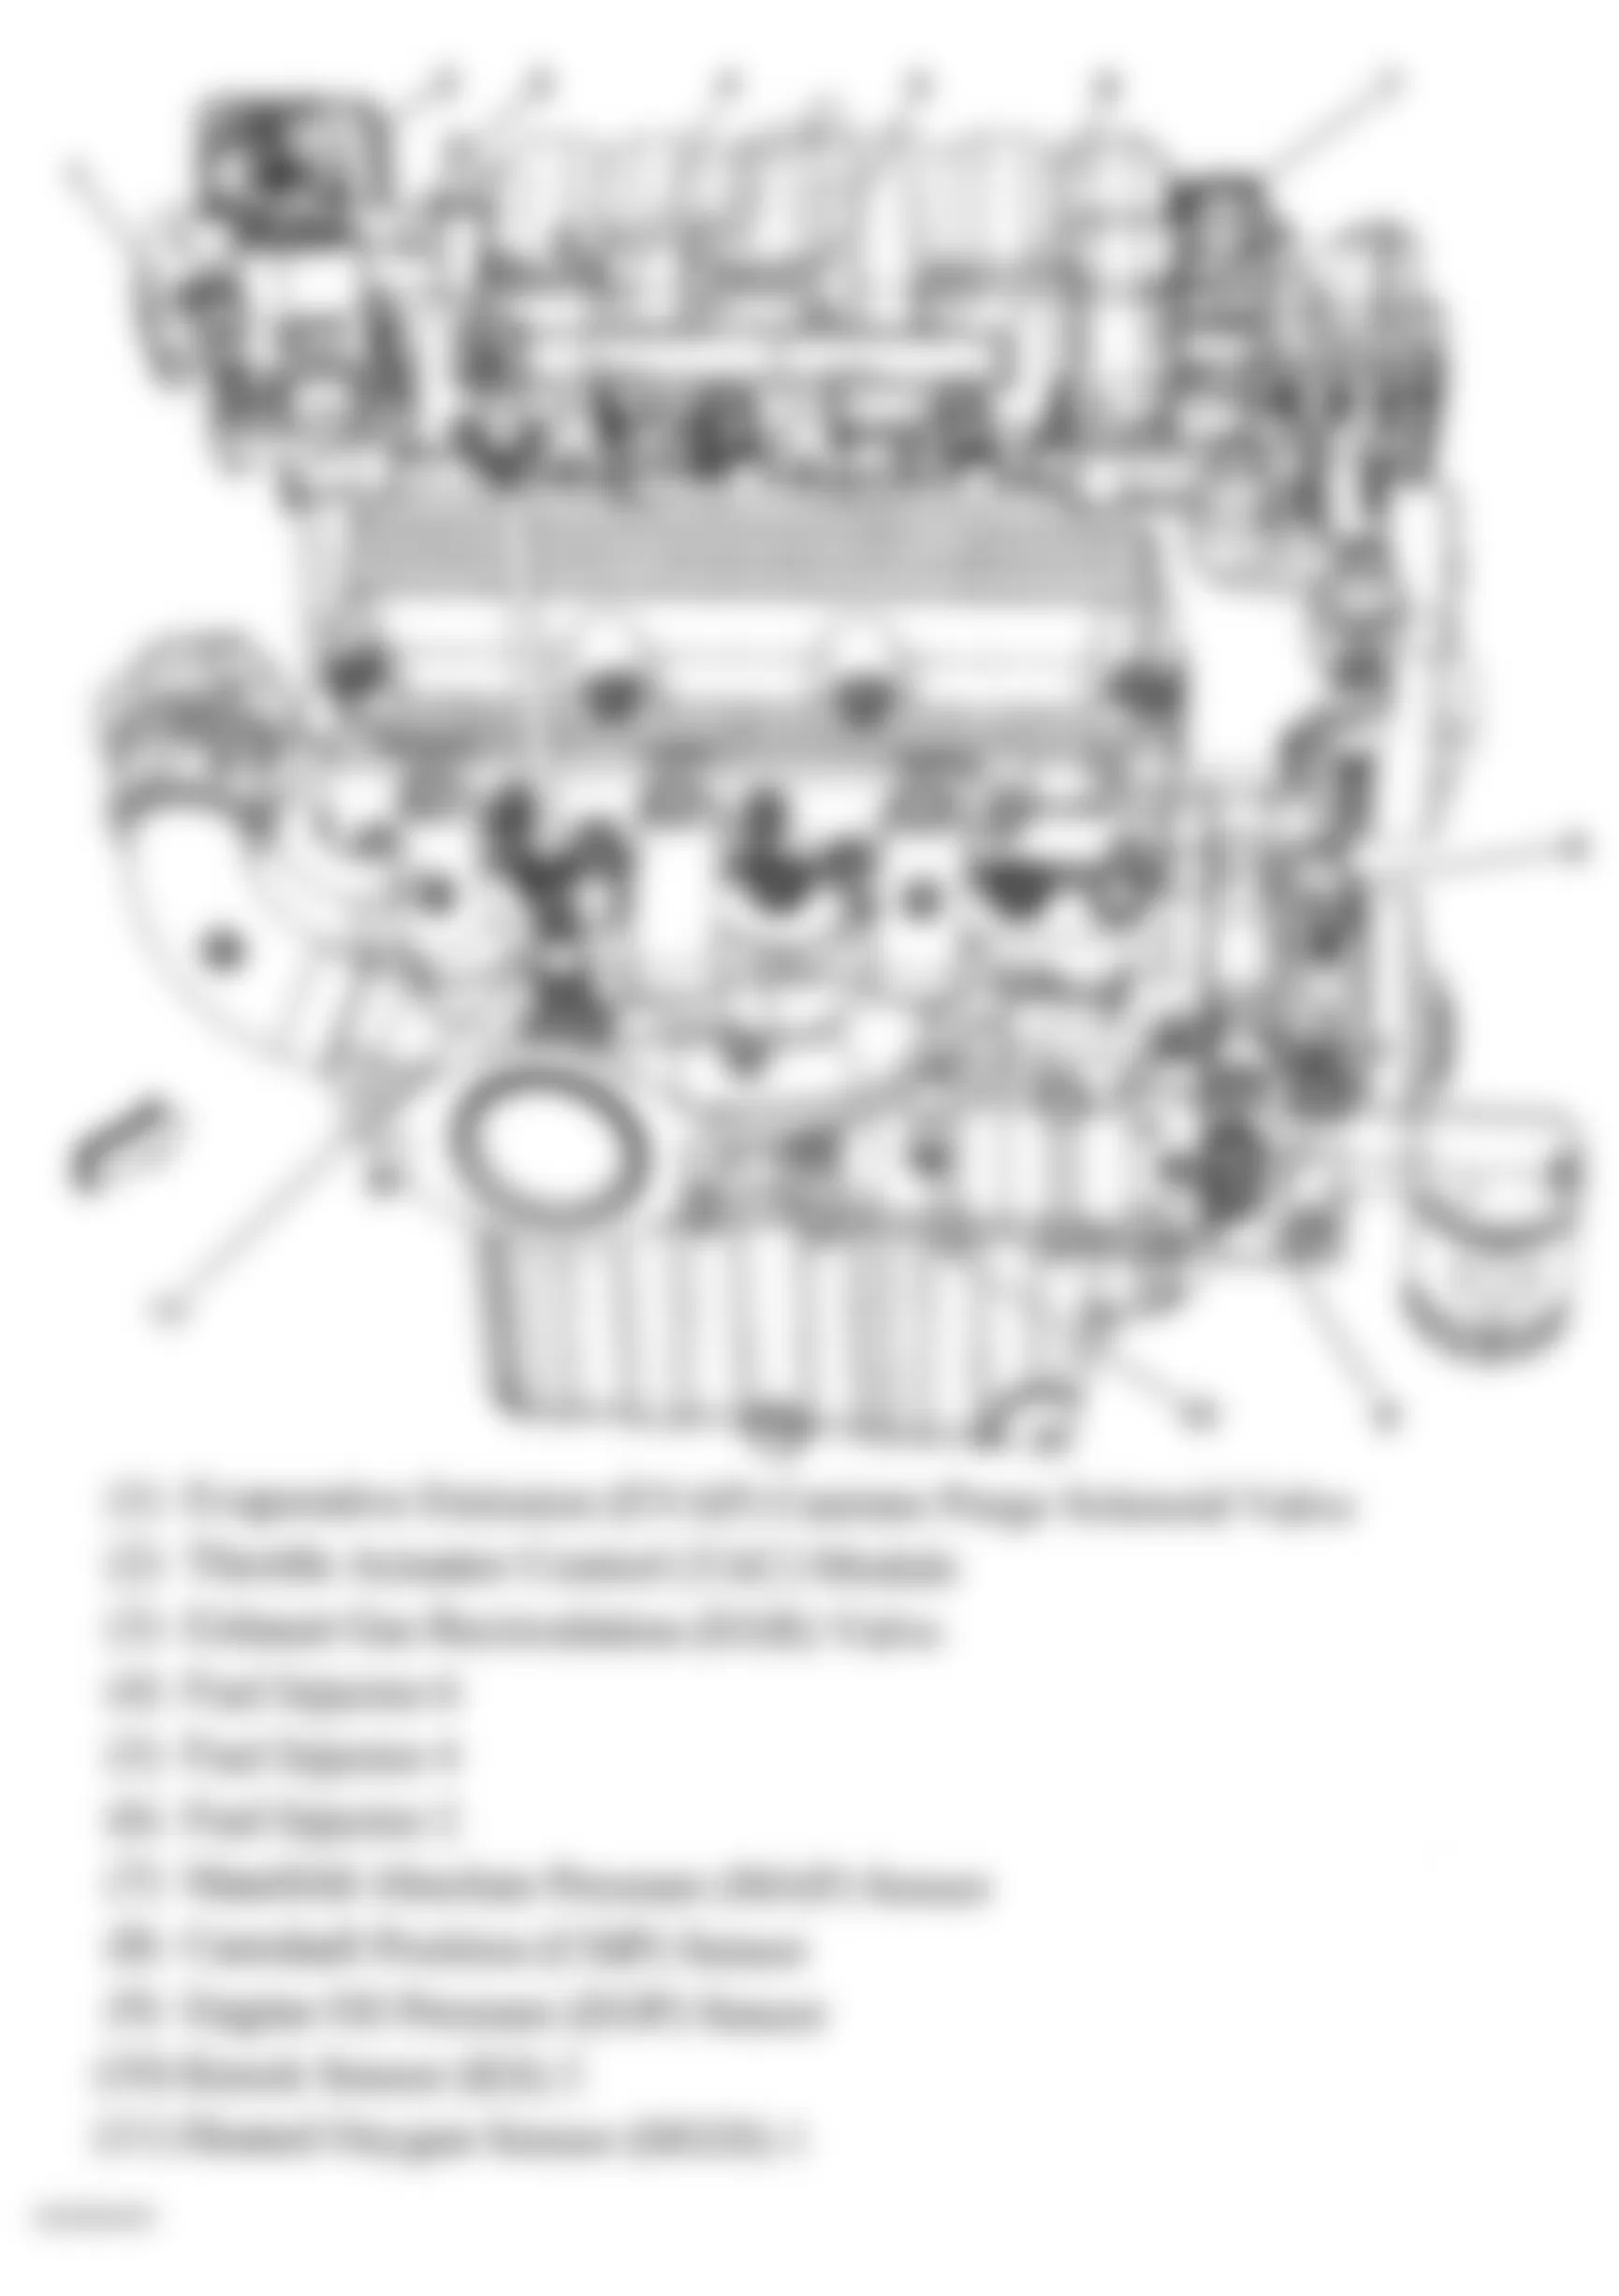 Buick LaCrosse CXL 2006 - Component Locations -  Right Side Of Engine (3.8L)